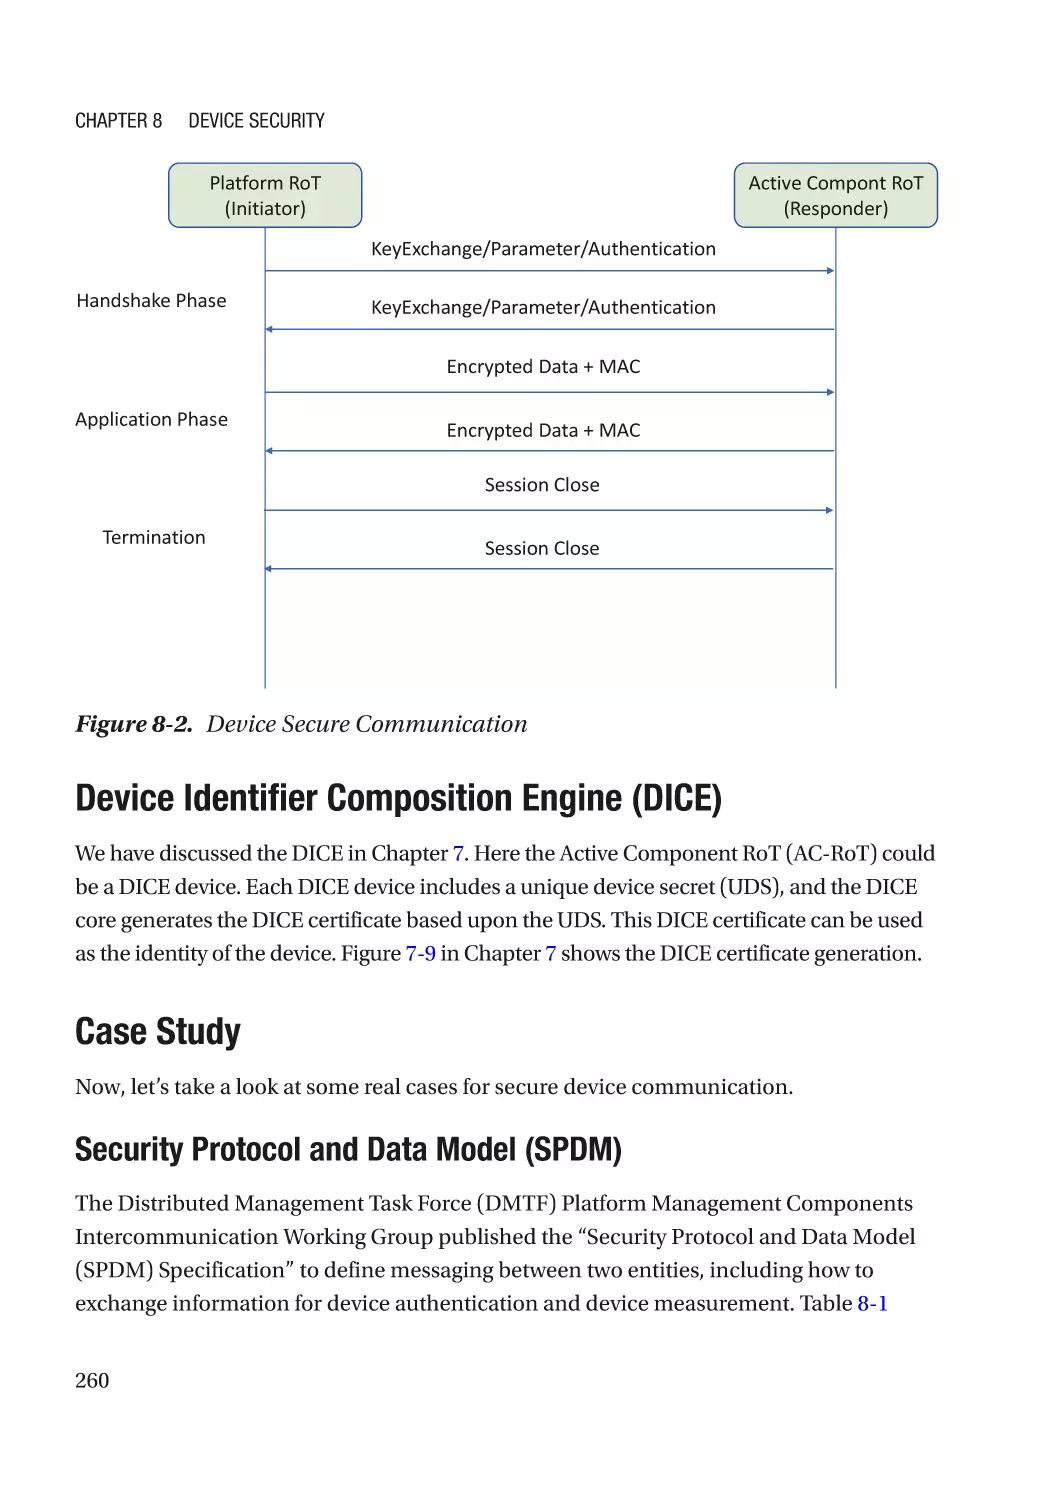 Device Identifier Composition Engine (DICE)
Case Study
Security Protocol and Data Model (SPDM)